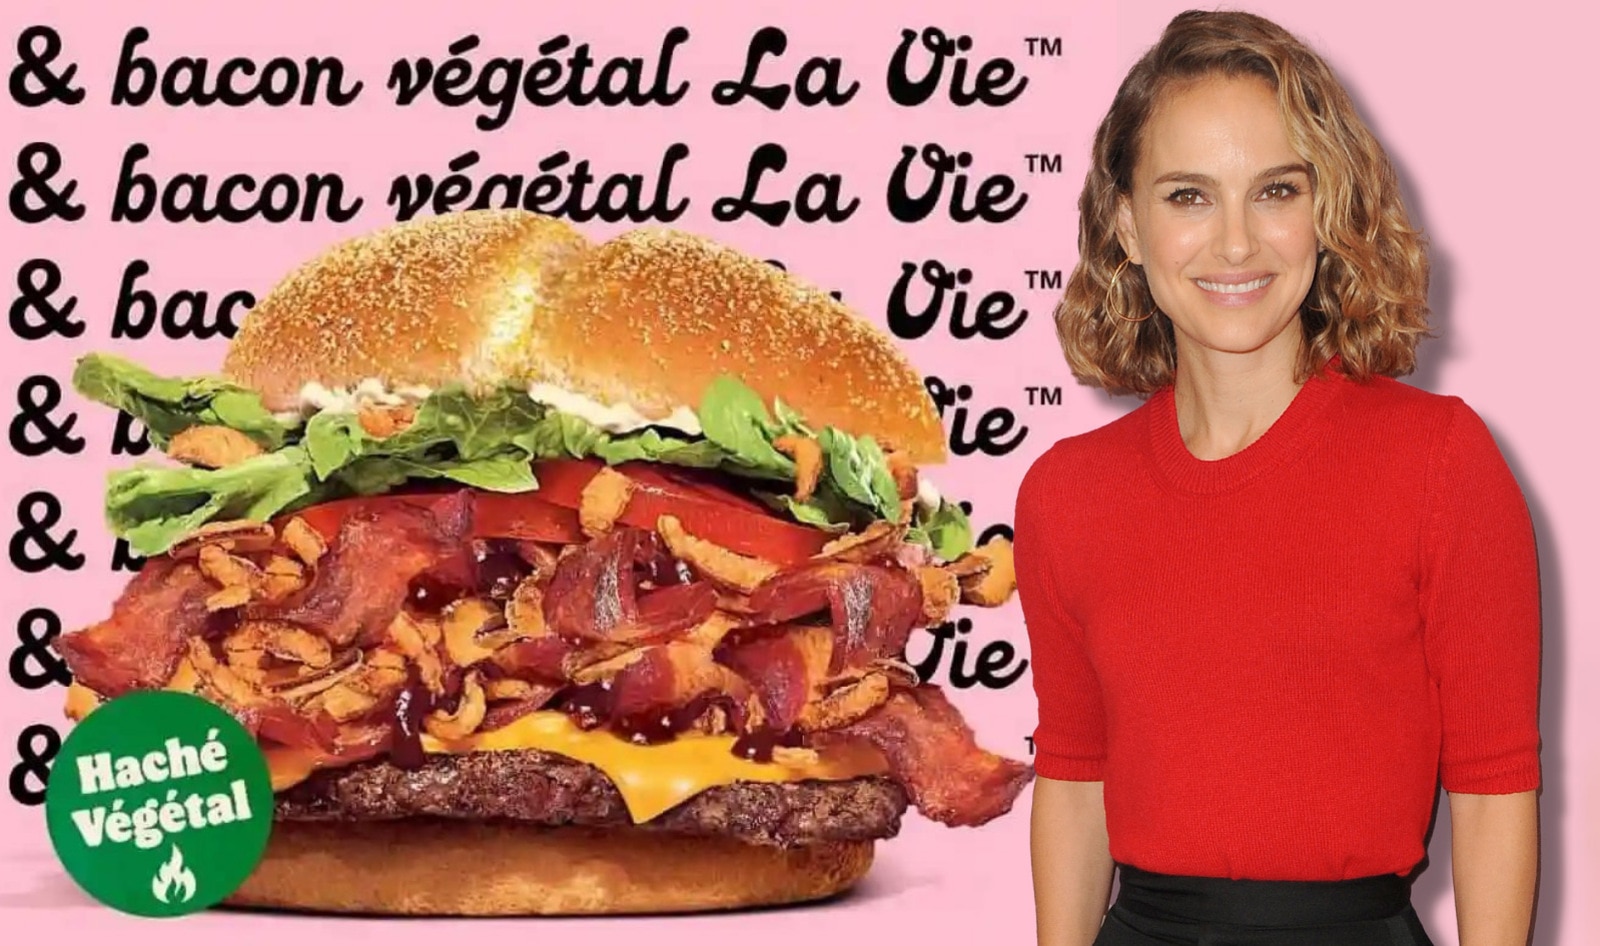 How This Natalie Portman-Backed Brand Convinced Burger King to Put Its Vegan Bacon on the Menu